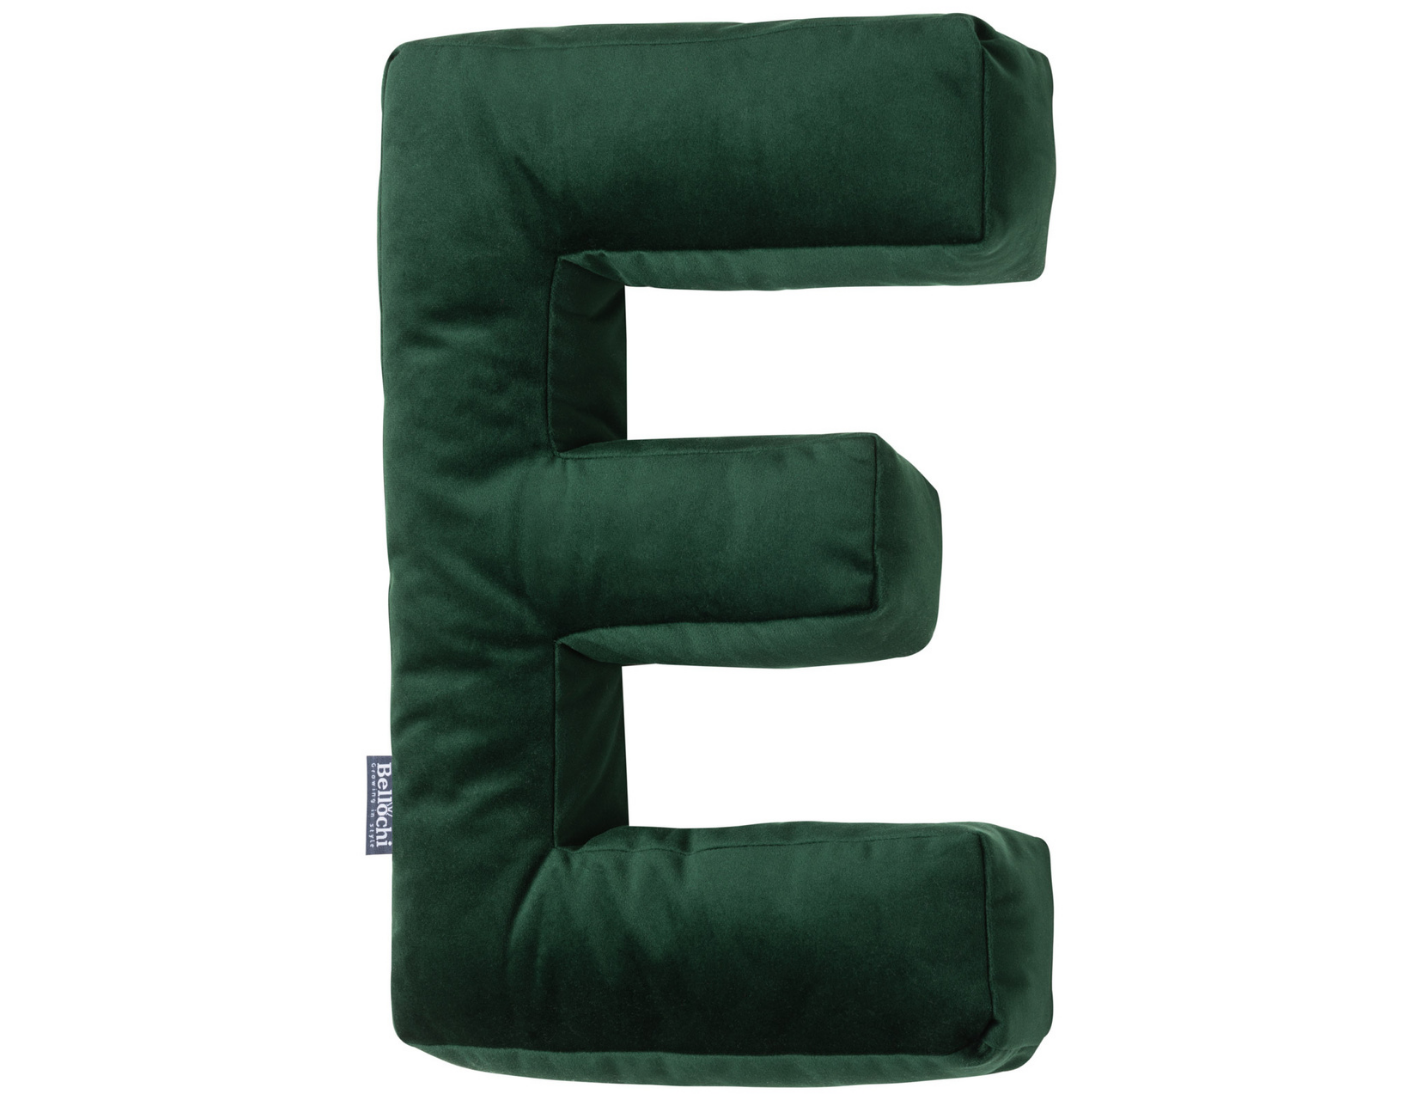 Decorative pillow in the shape of a letter ‘E’, green